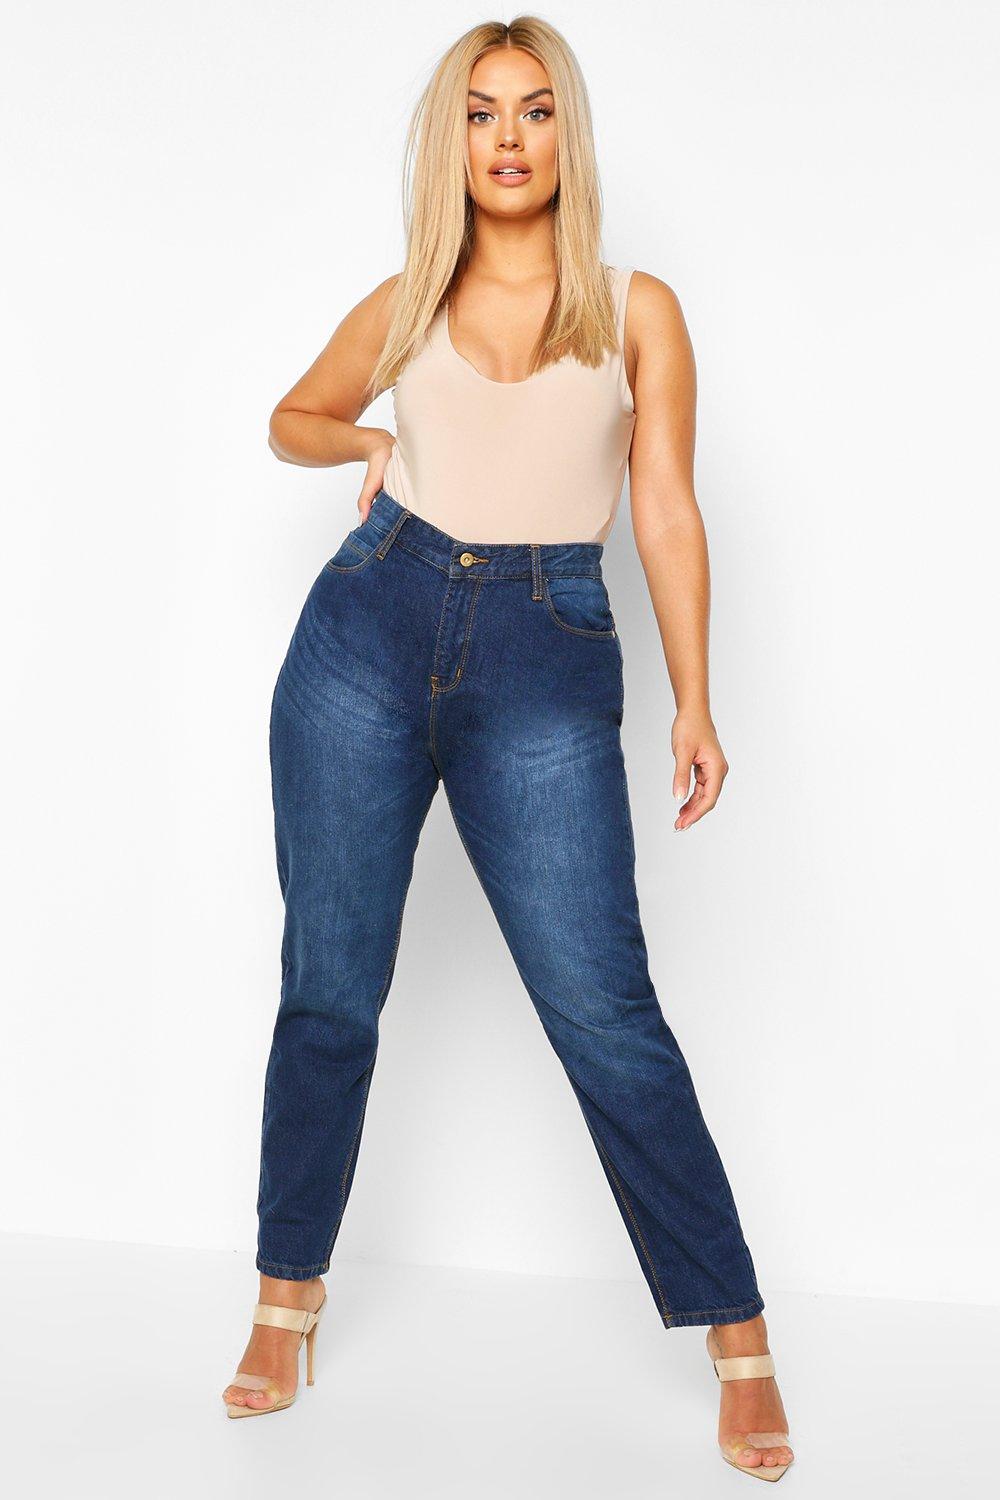 size 16 mom jeans